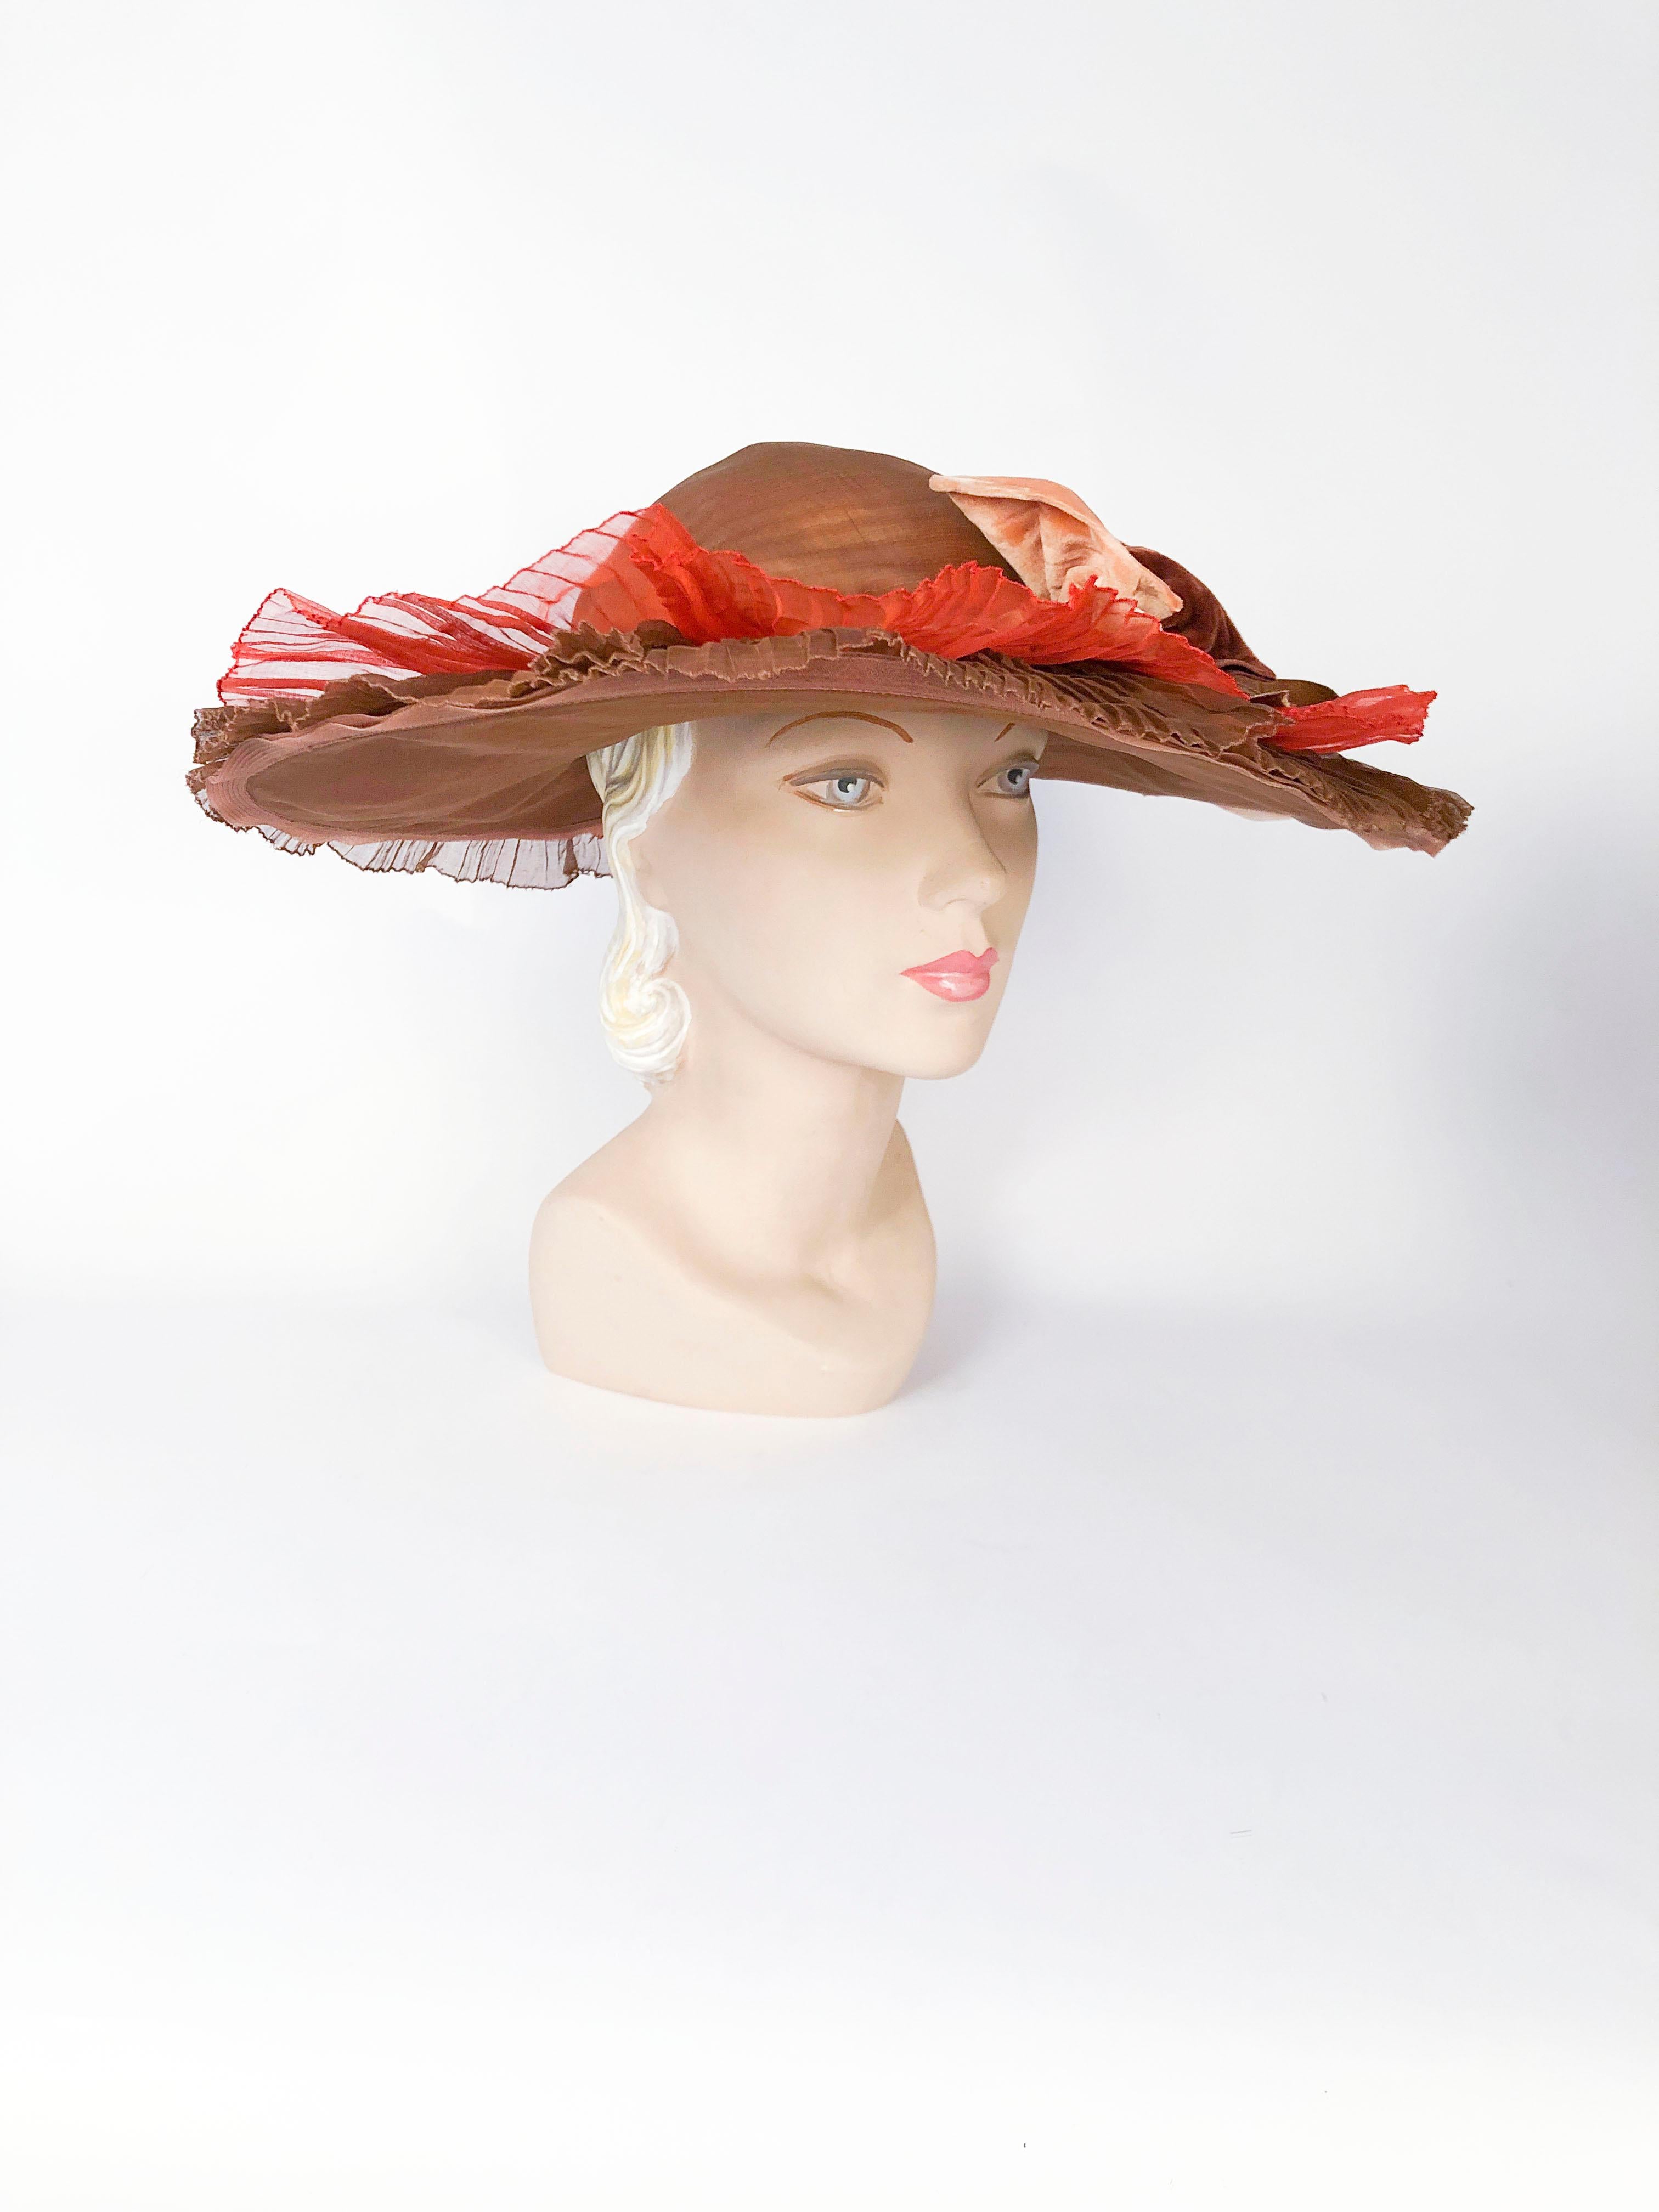 1930s/1940s Autumn-toned Horsehair Wide-Brimmed Hat with two pleated silk organza ruffles in orange and chestnut brown. Finished with a silk velvet band and an oversized multi-toned bow.